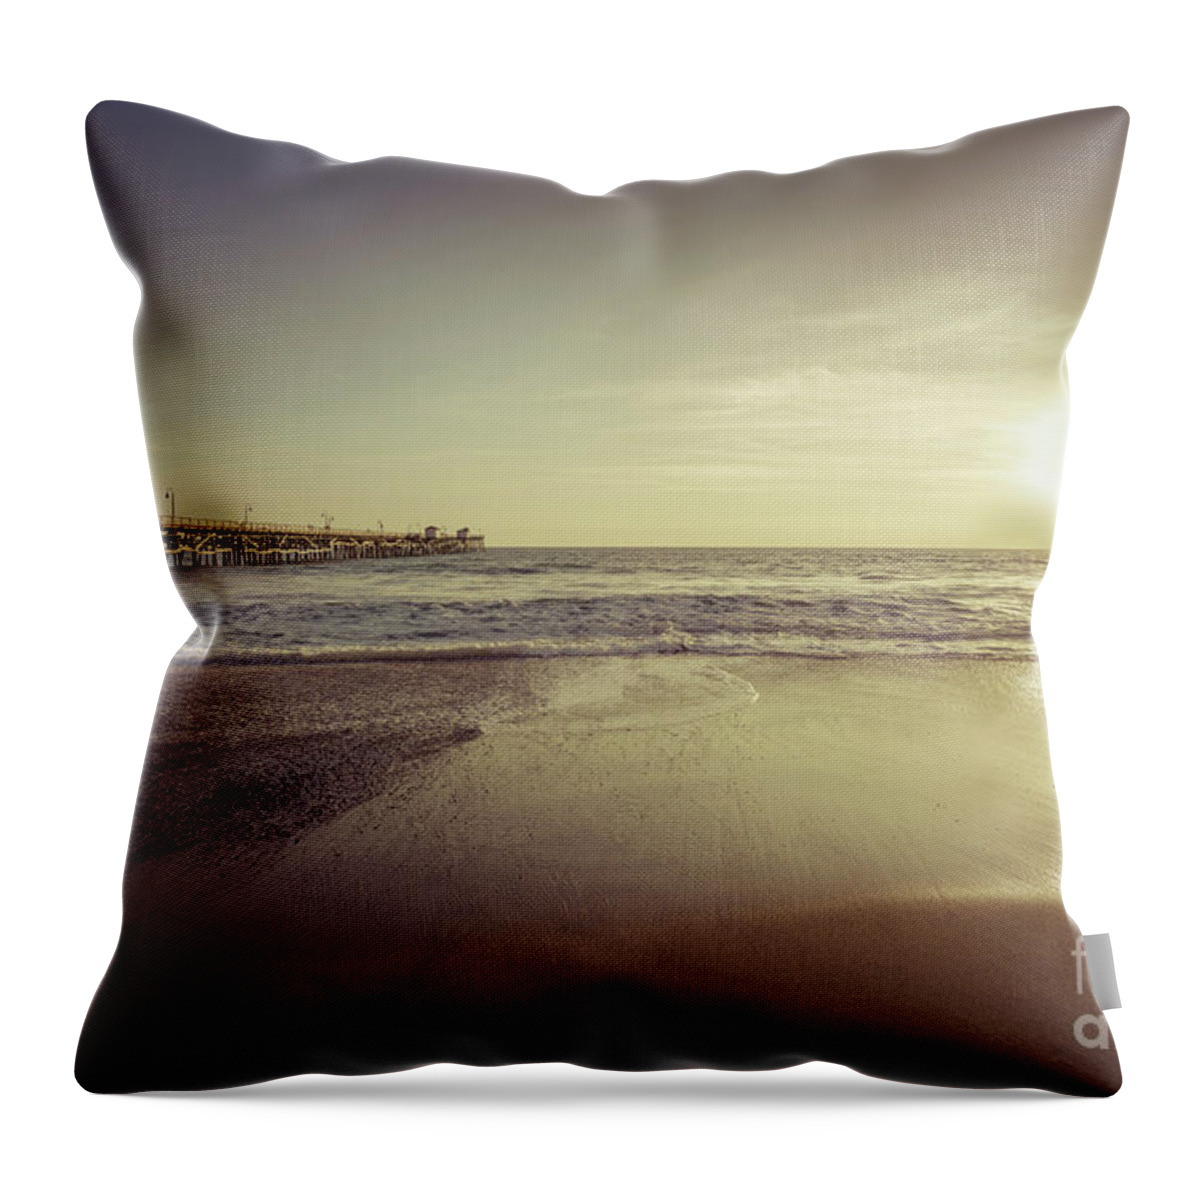 2017 Throw Pillow featuring the photograph San Clemente Pier Sunset Retro Photo by Paul Velgos